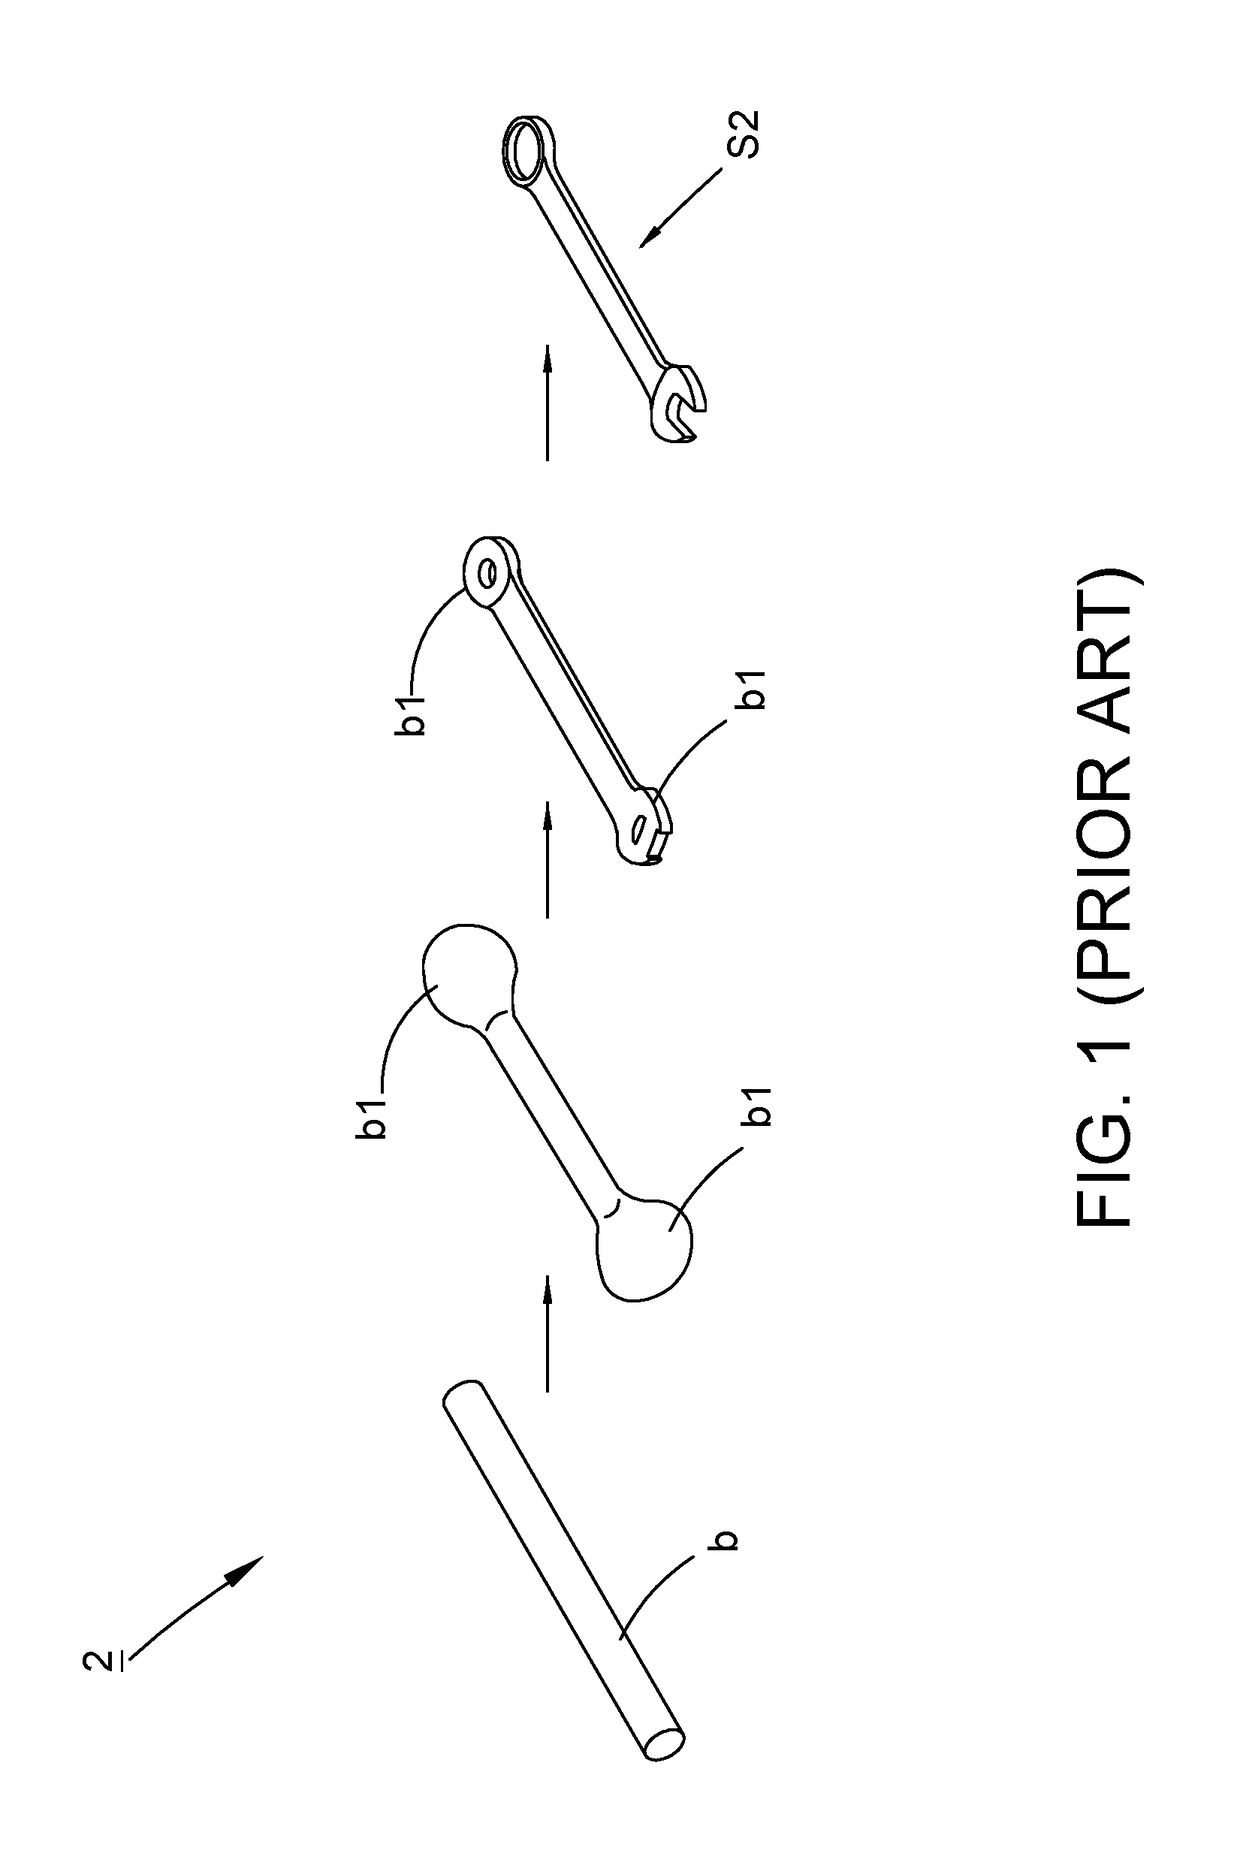 Method for forming a wrench end